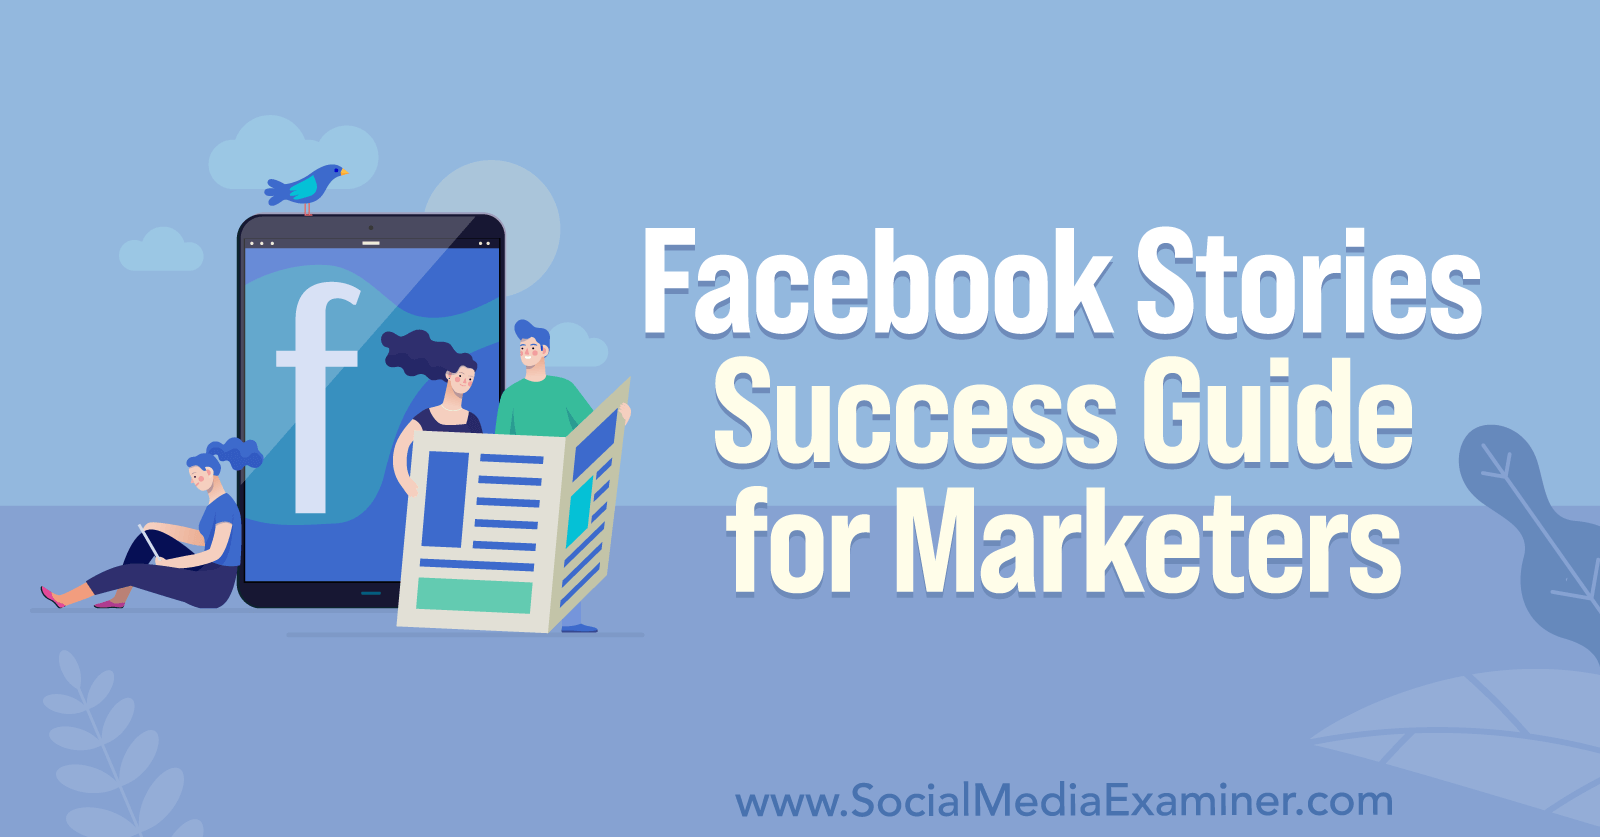 Facebook Stories Success Guide for Marketers by Anna Sonnenberg on Social Media Examiner.